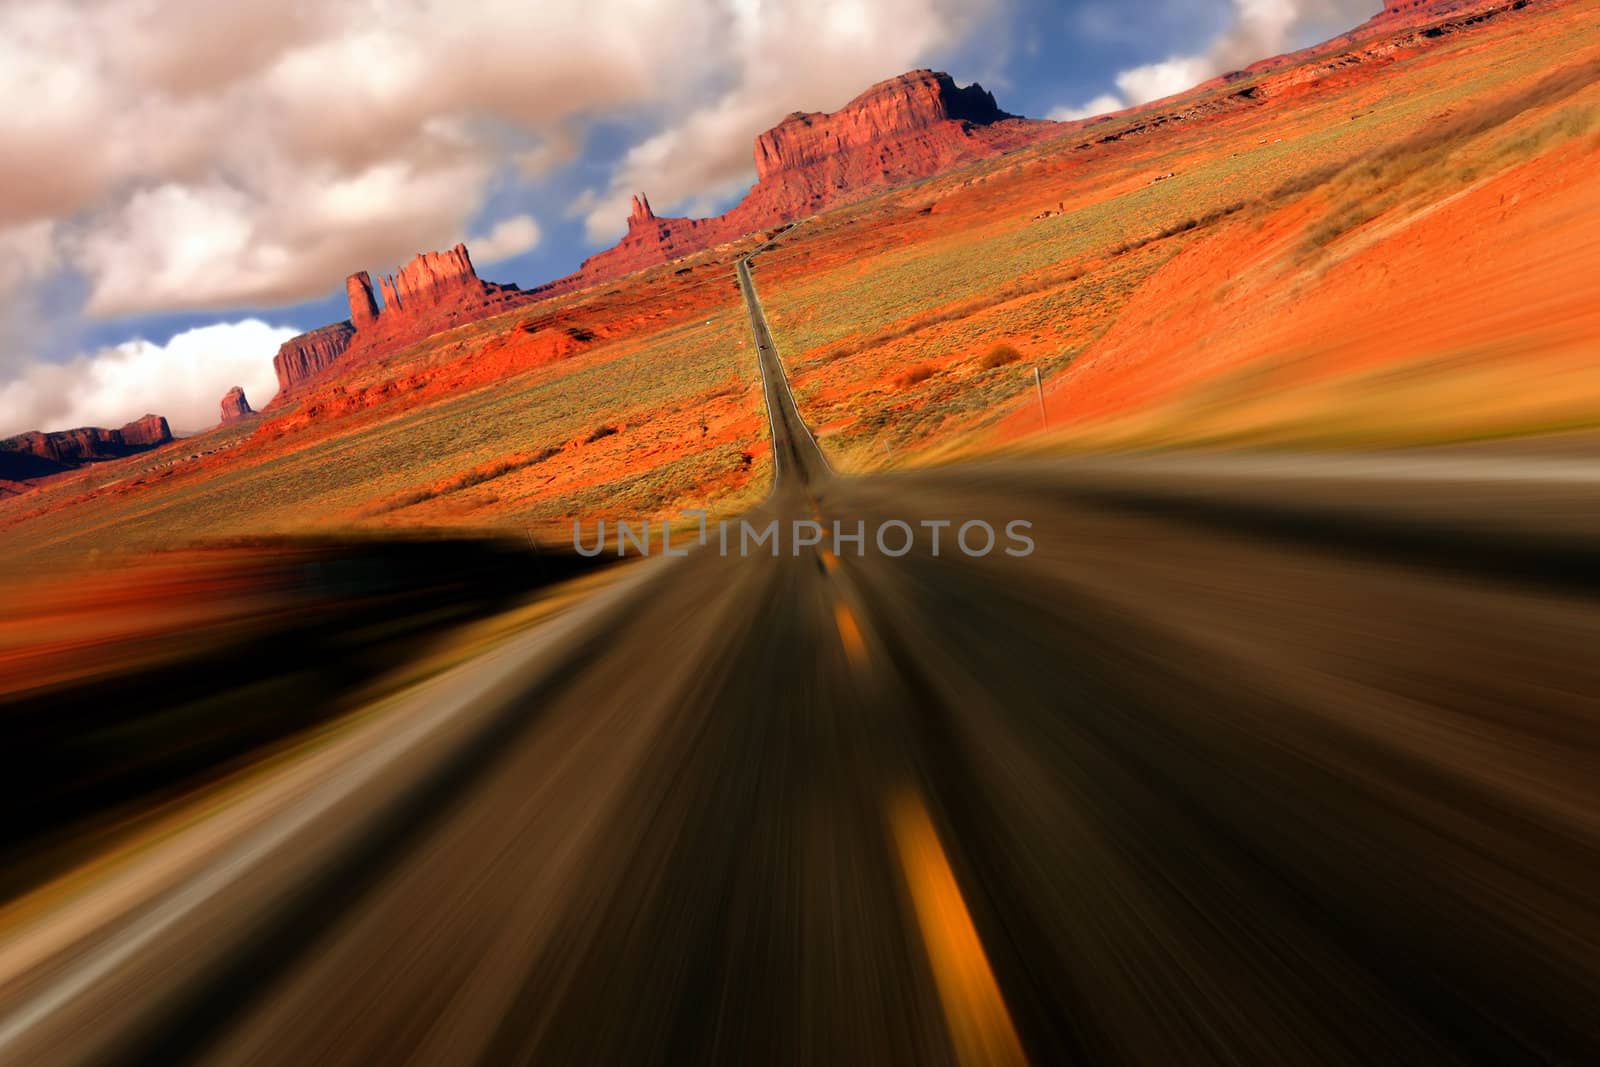 Dramatic Abstract View from Mile 13 on the Road to Monument Valley Arizona With Intentional Speed Blur